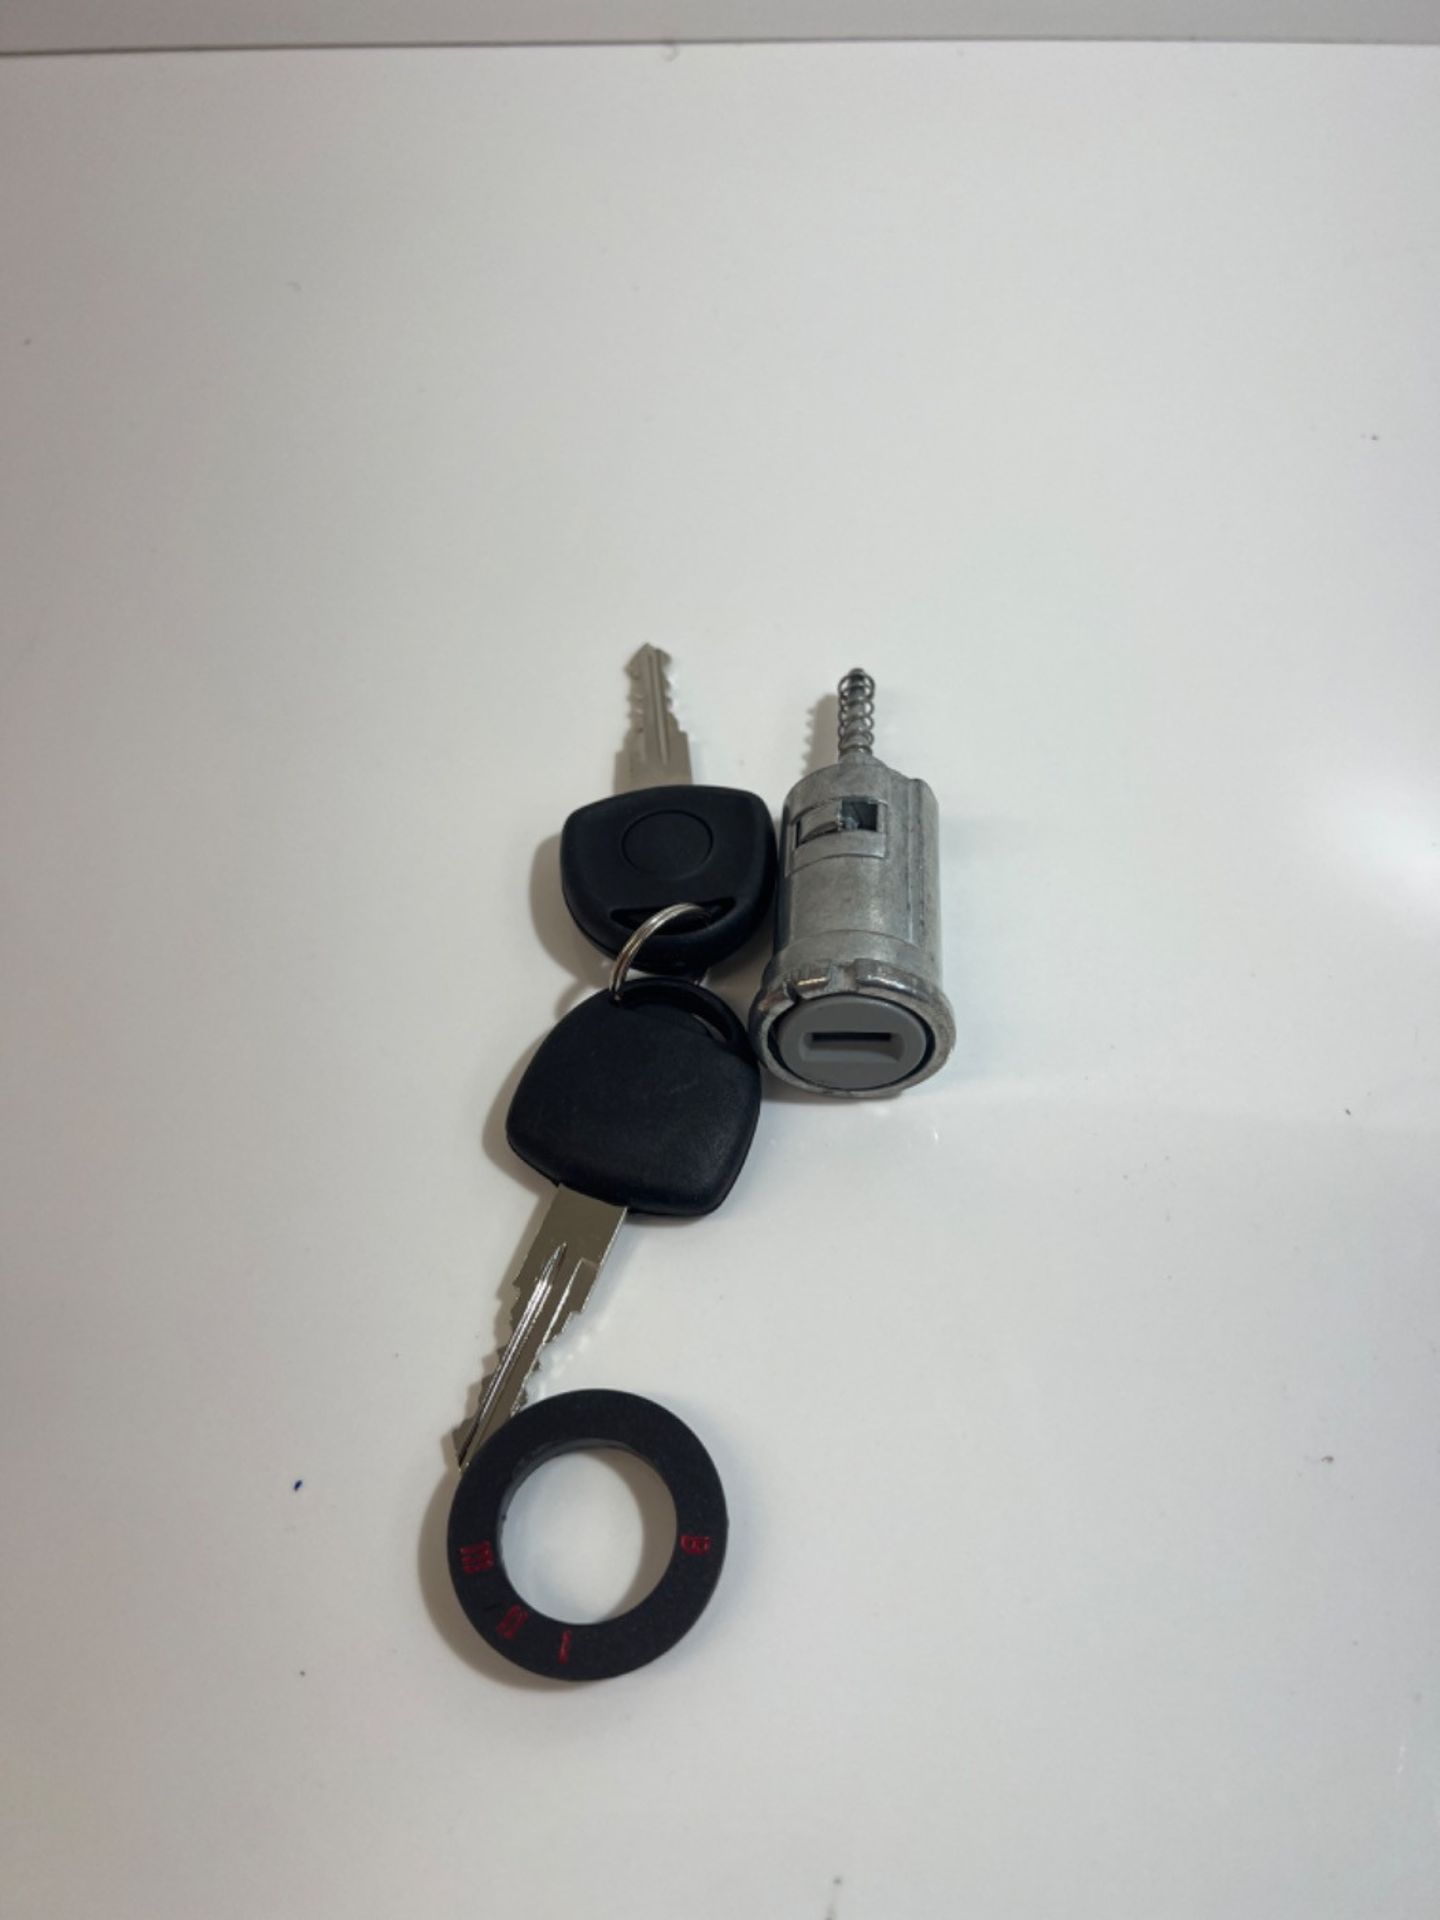 febi bilstein 18167 Barrel Lock for ignition, with key, pack of one - Image 2 of 3